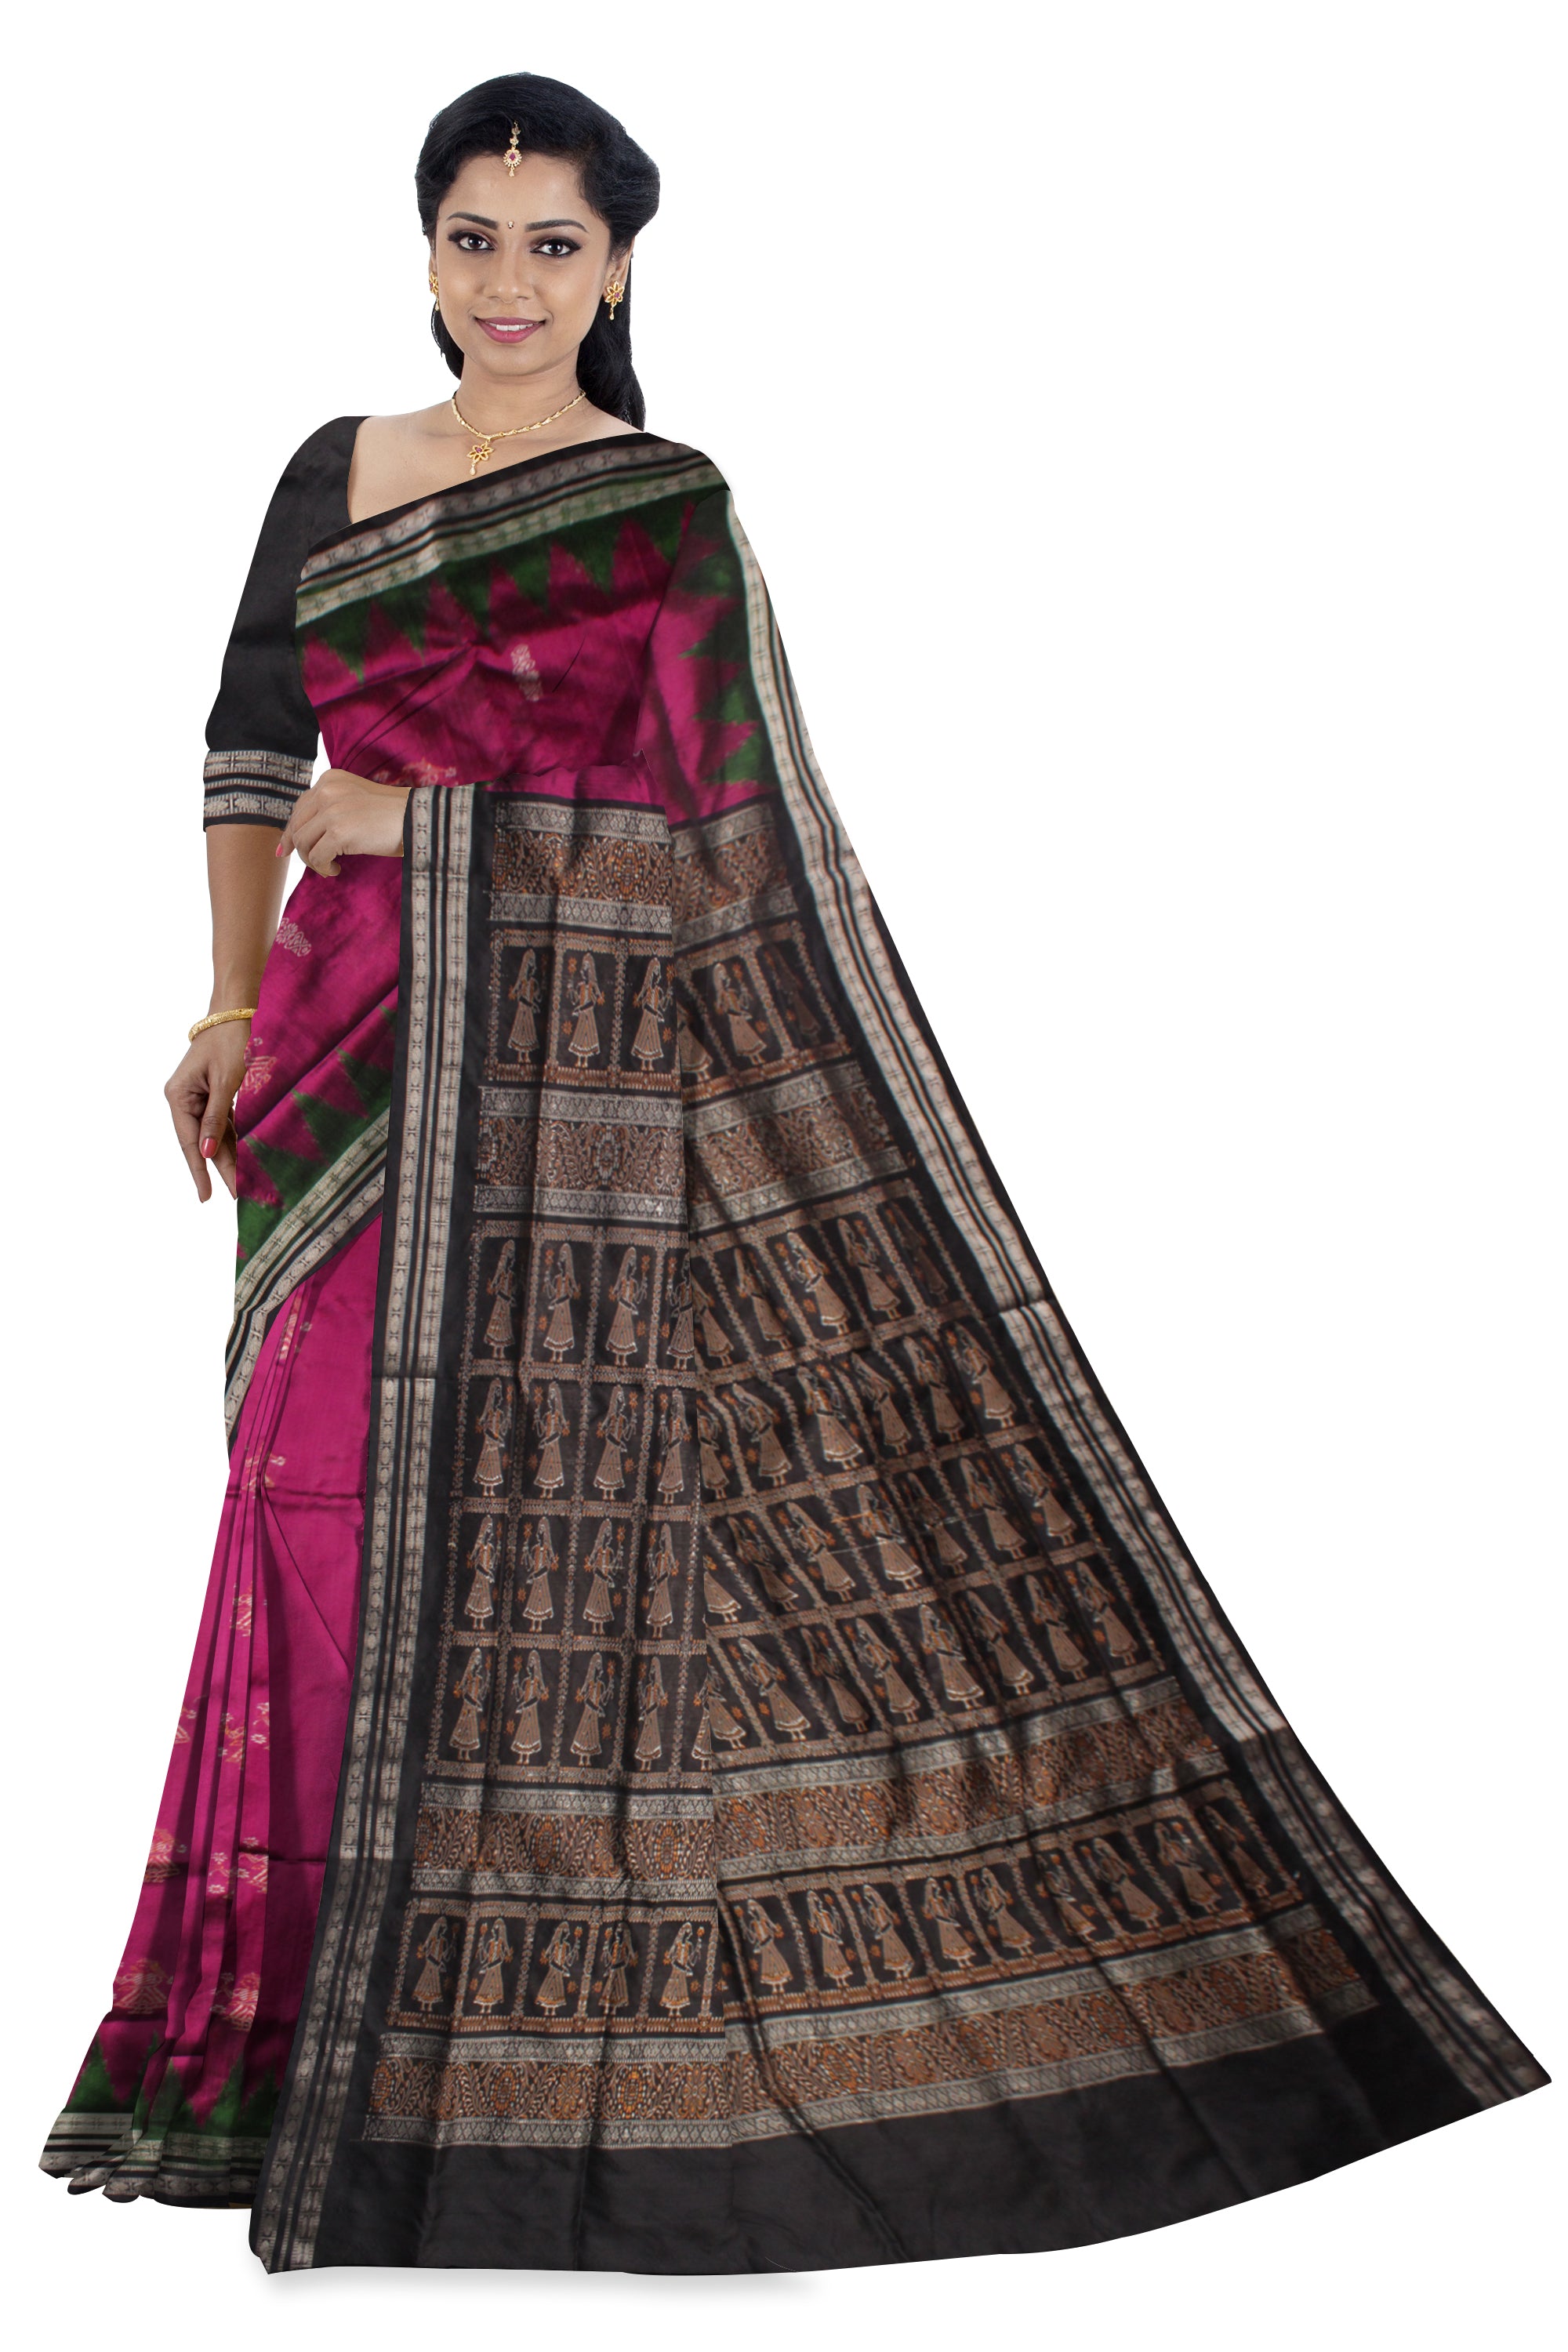 PALLU WITH  WHOLE BODY DOLL PRINT PATTERN PATA SAREE IS PINK ,GREEN  AND BLACK COLOR BASE,WITH MATCHING BLOUSE PIECE. - Koshali Arts & Crafts Enterprise